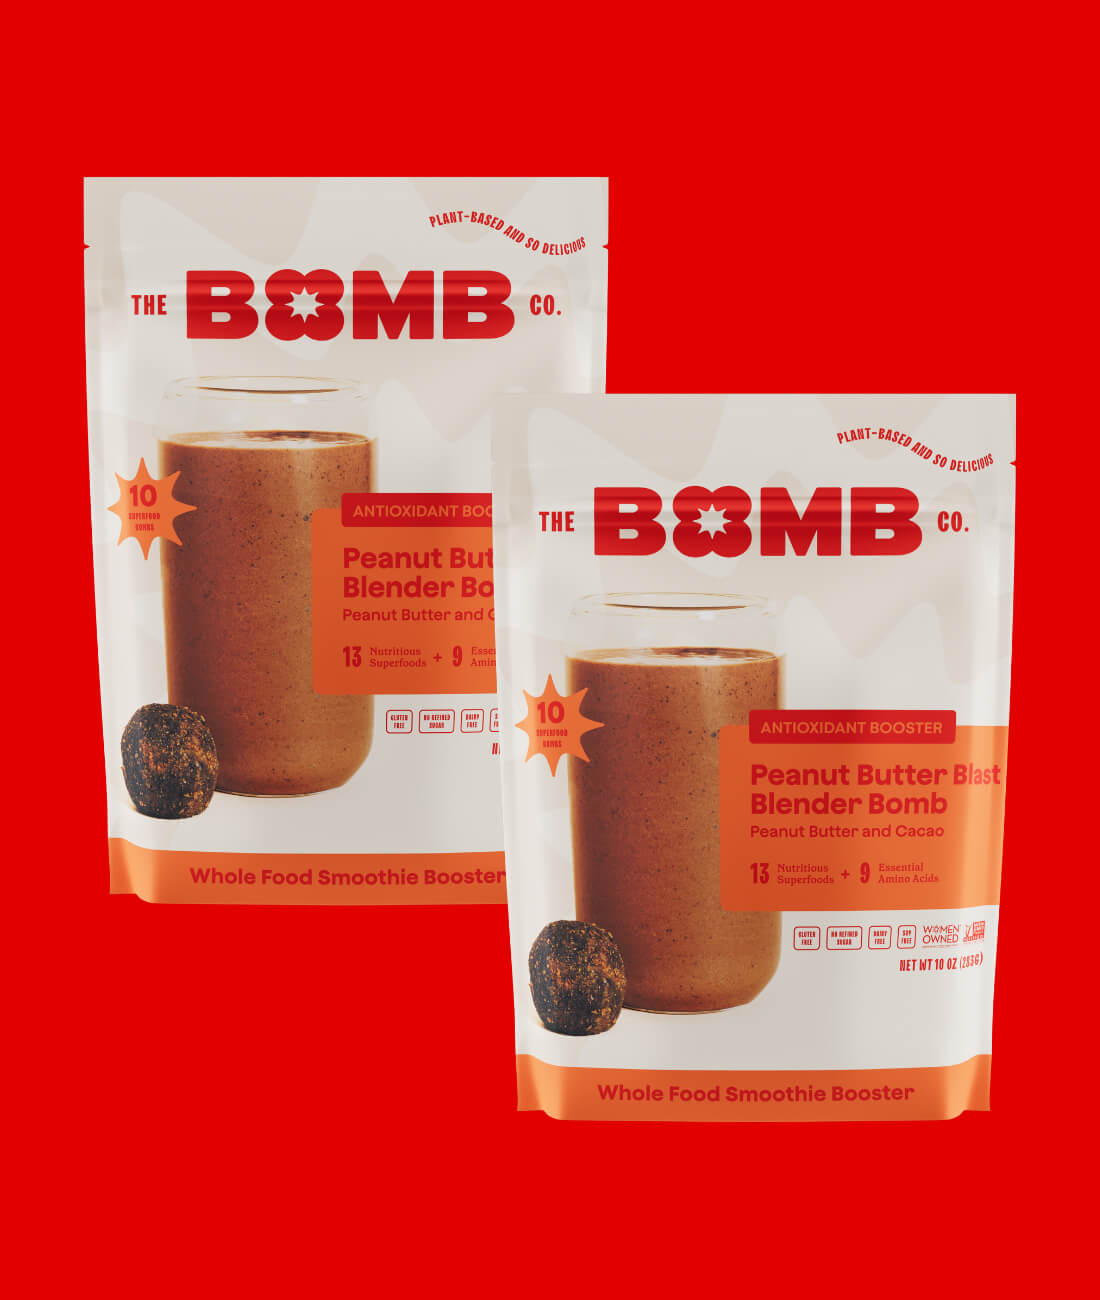 Smoothie Booster by Blender Bombs